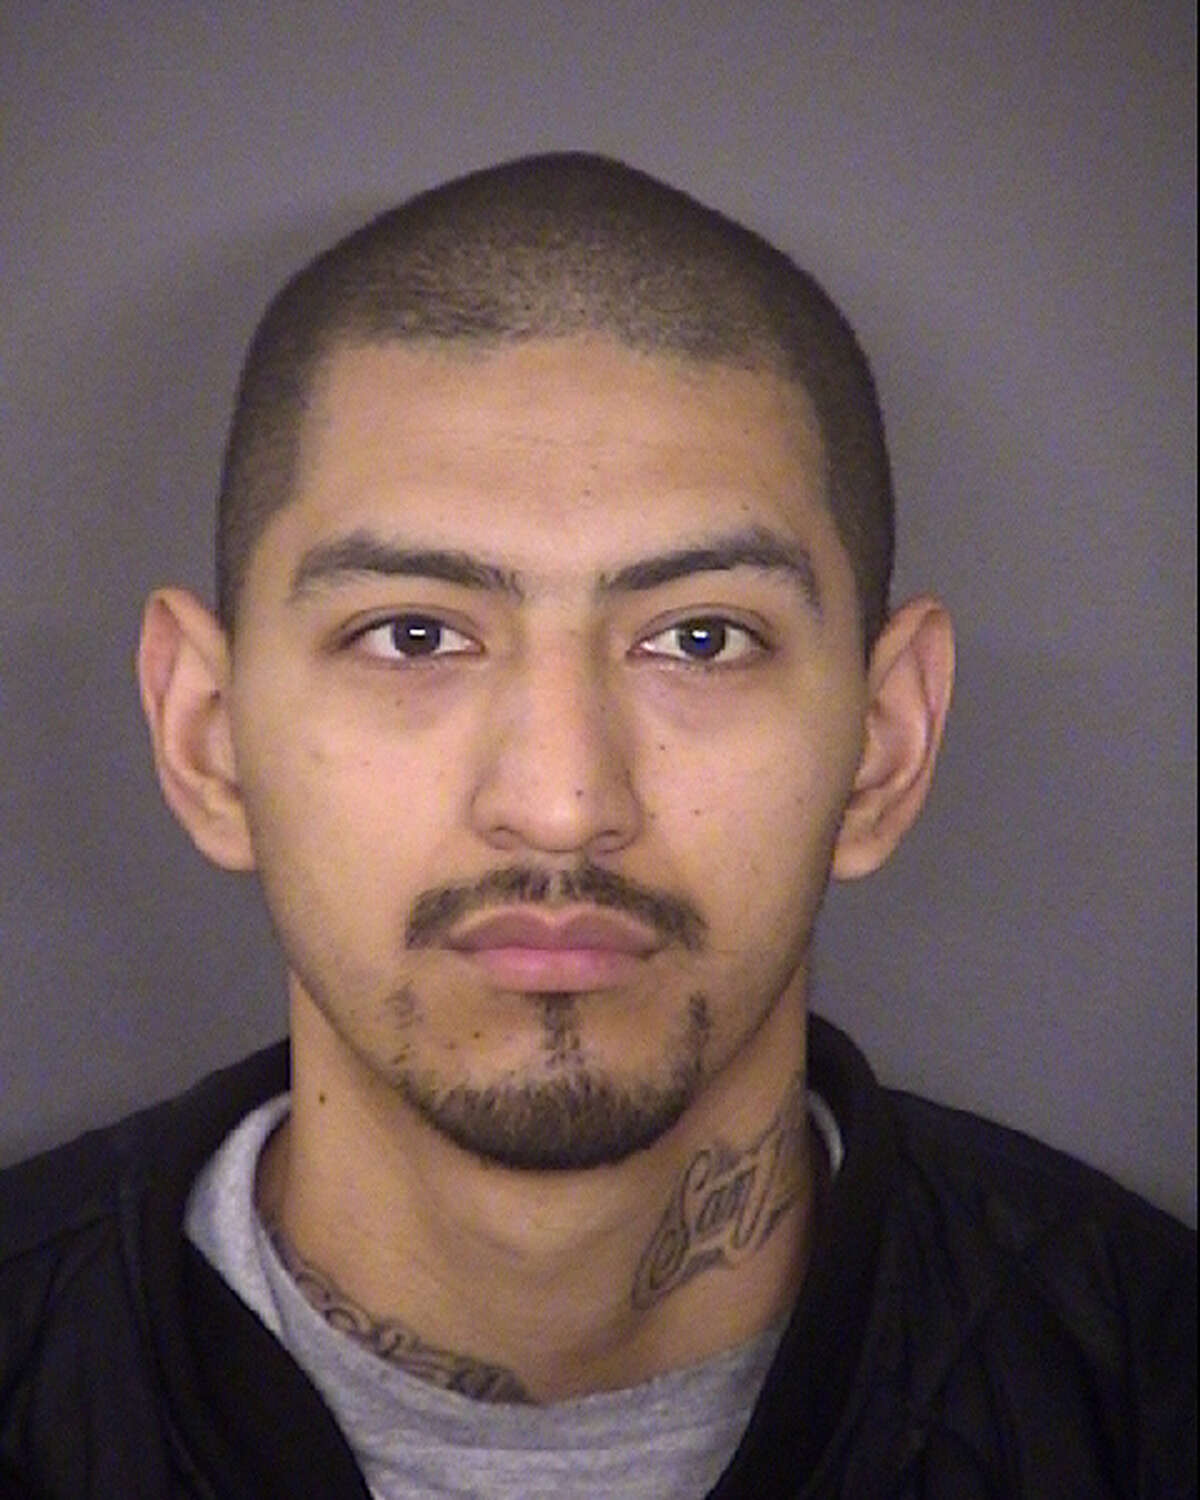 Jose Manuel Vega was indicted on sexual assault of a child and indecency with a child on June 17, 2019.